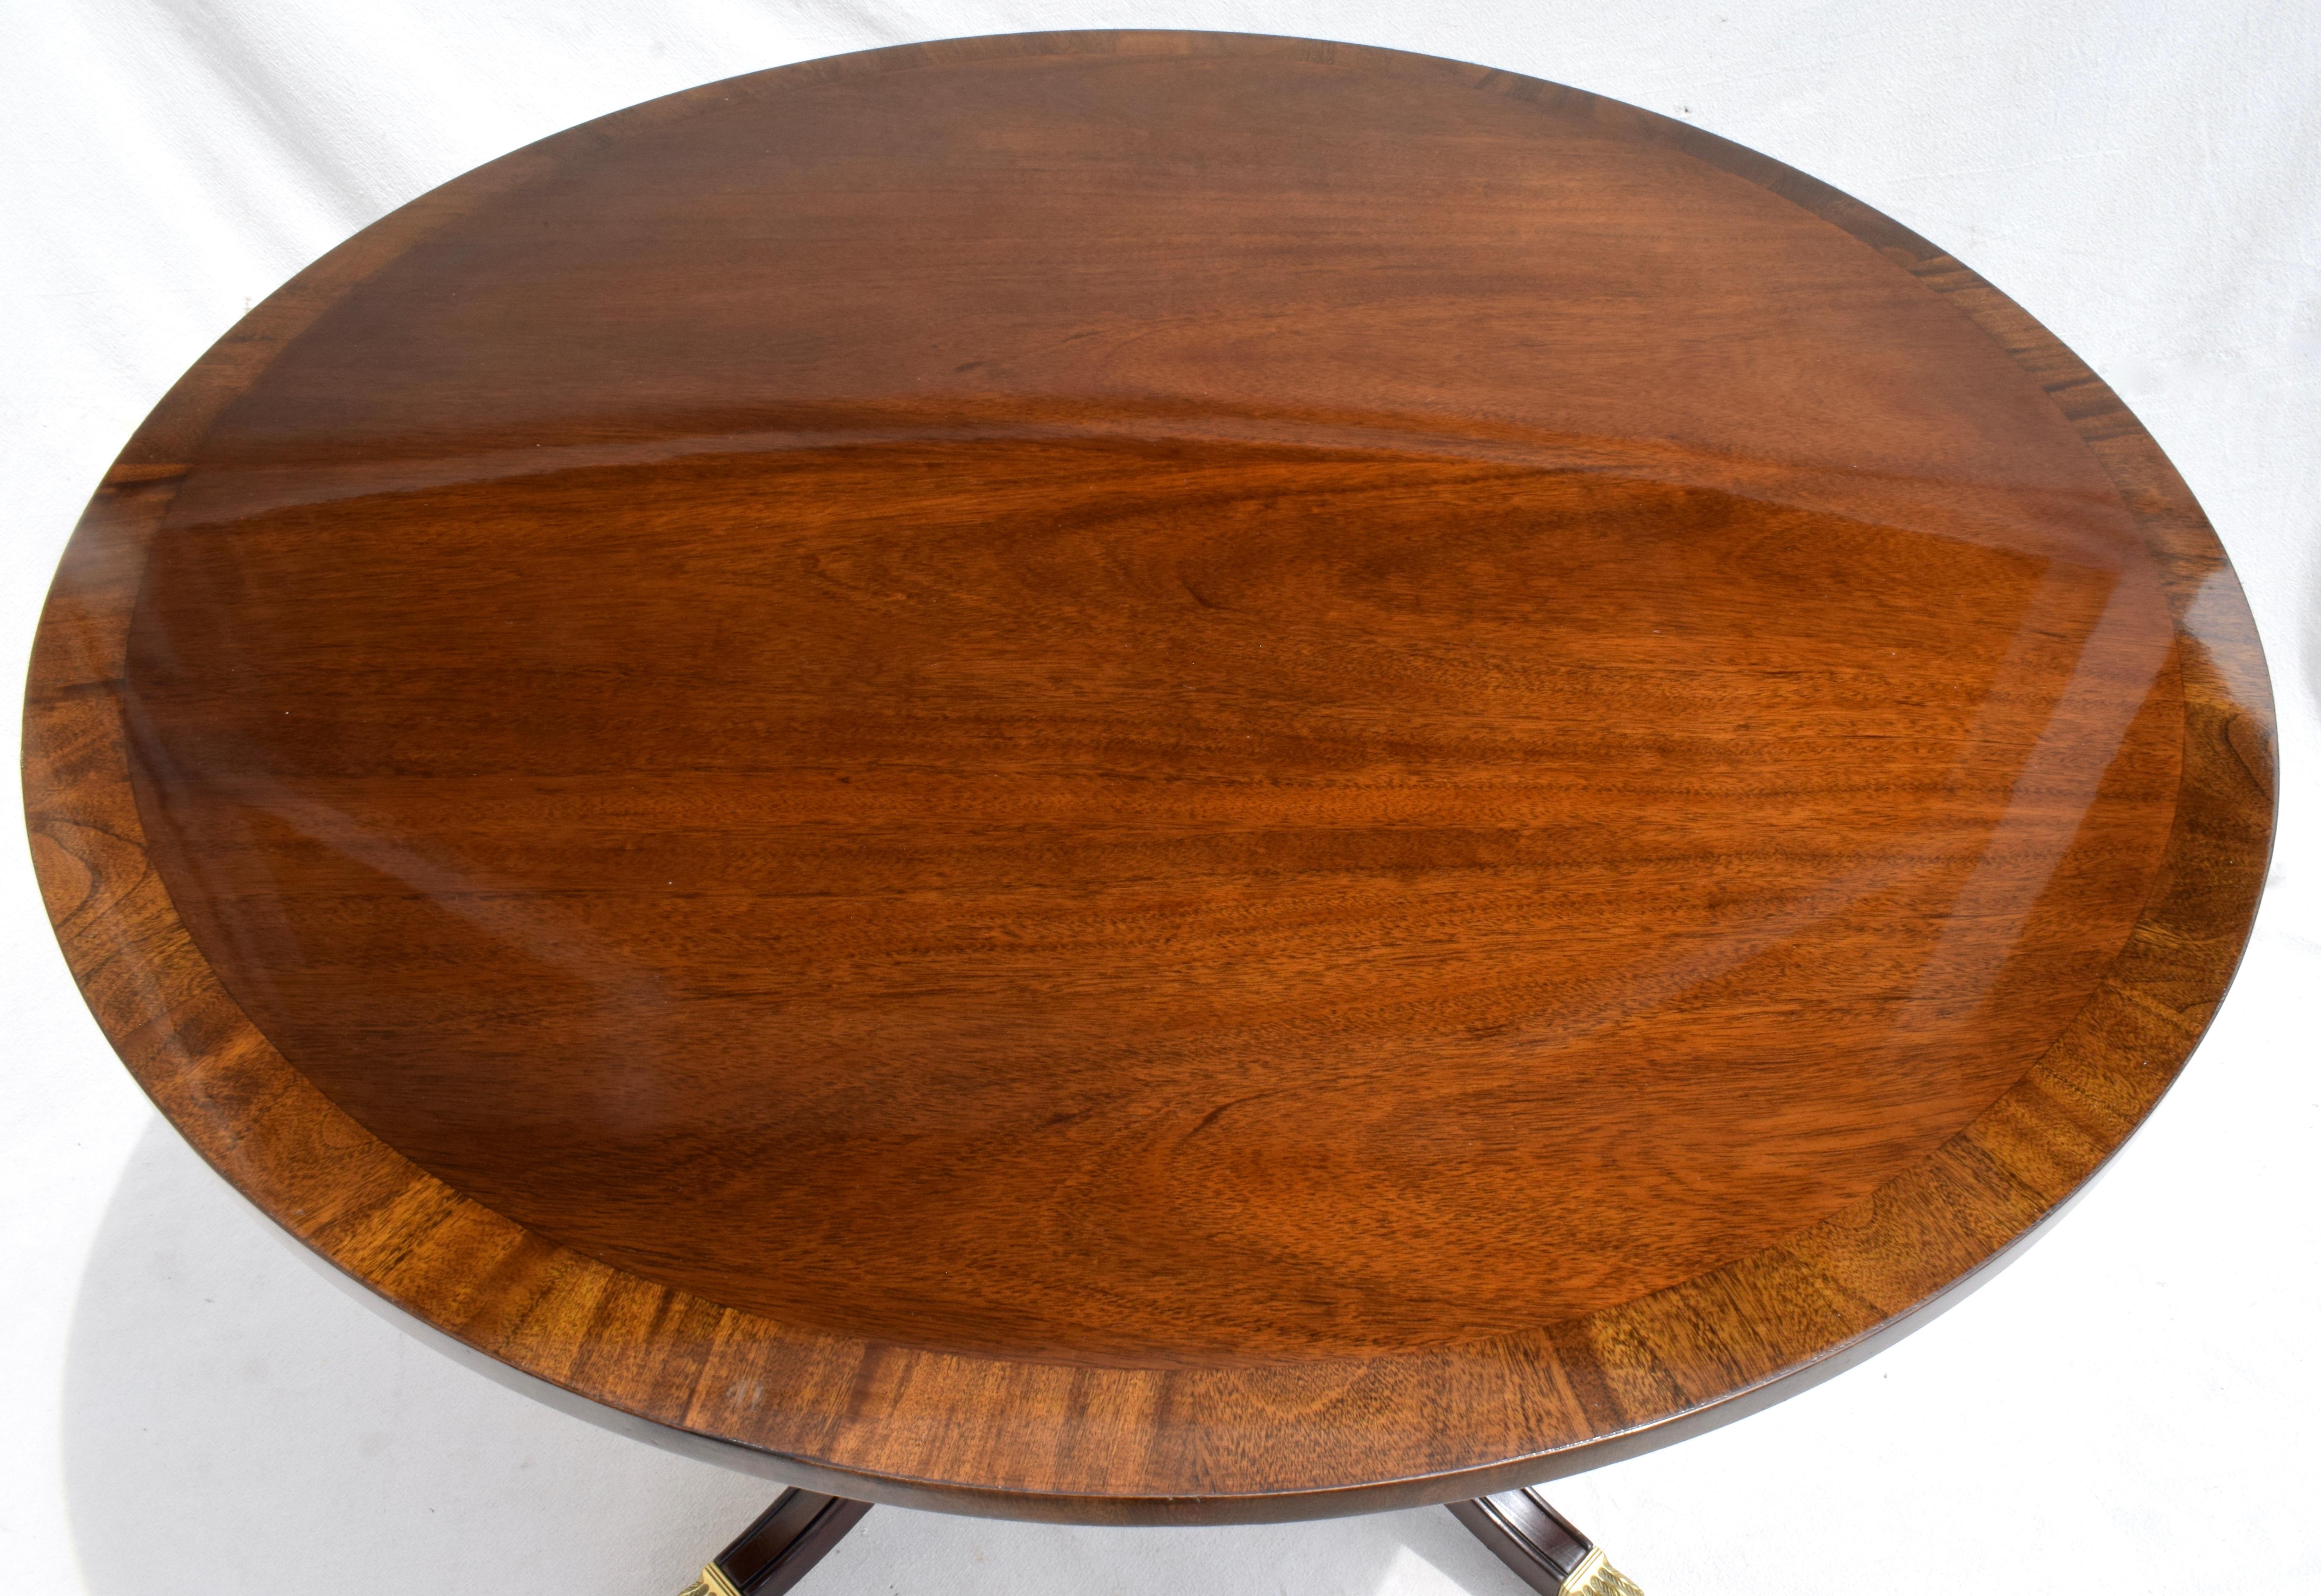 Baker Furniture Regency style banded Mahogany center table on brass casters with newly polished high finish to the top. Heirloom quality in excellent vintage condition.